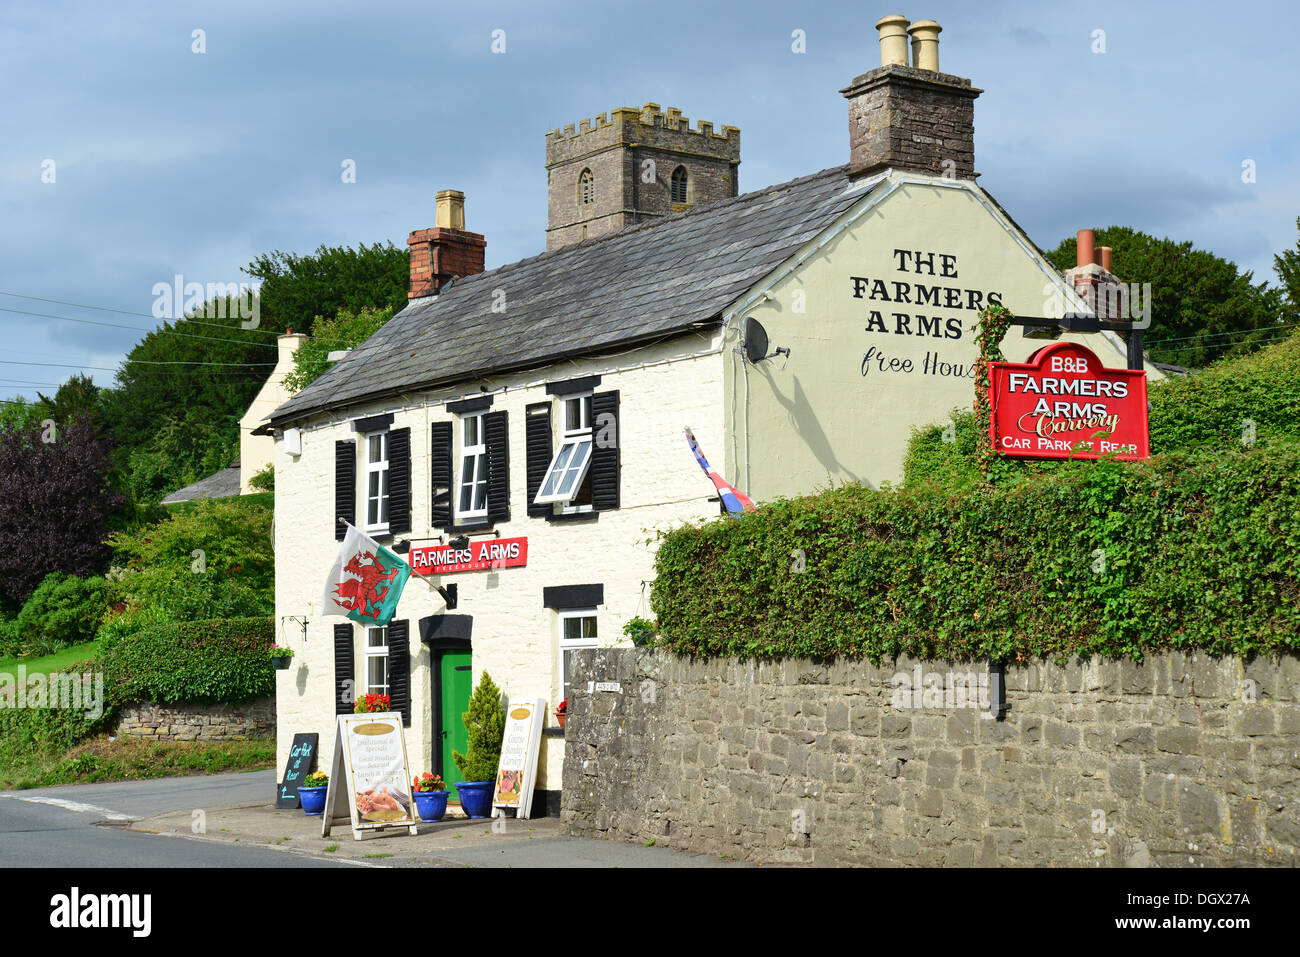 The Farmers Arms, Cwmdu, Brecon Beacons National Park, Powys, Wales, United Kingdom Stock Photo